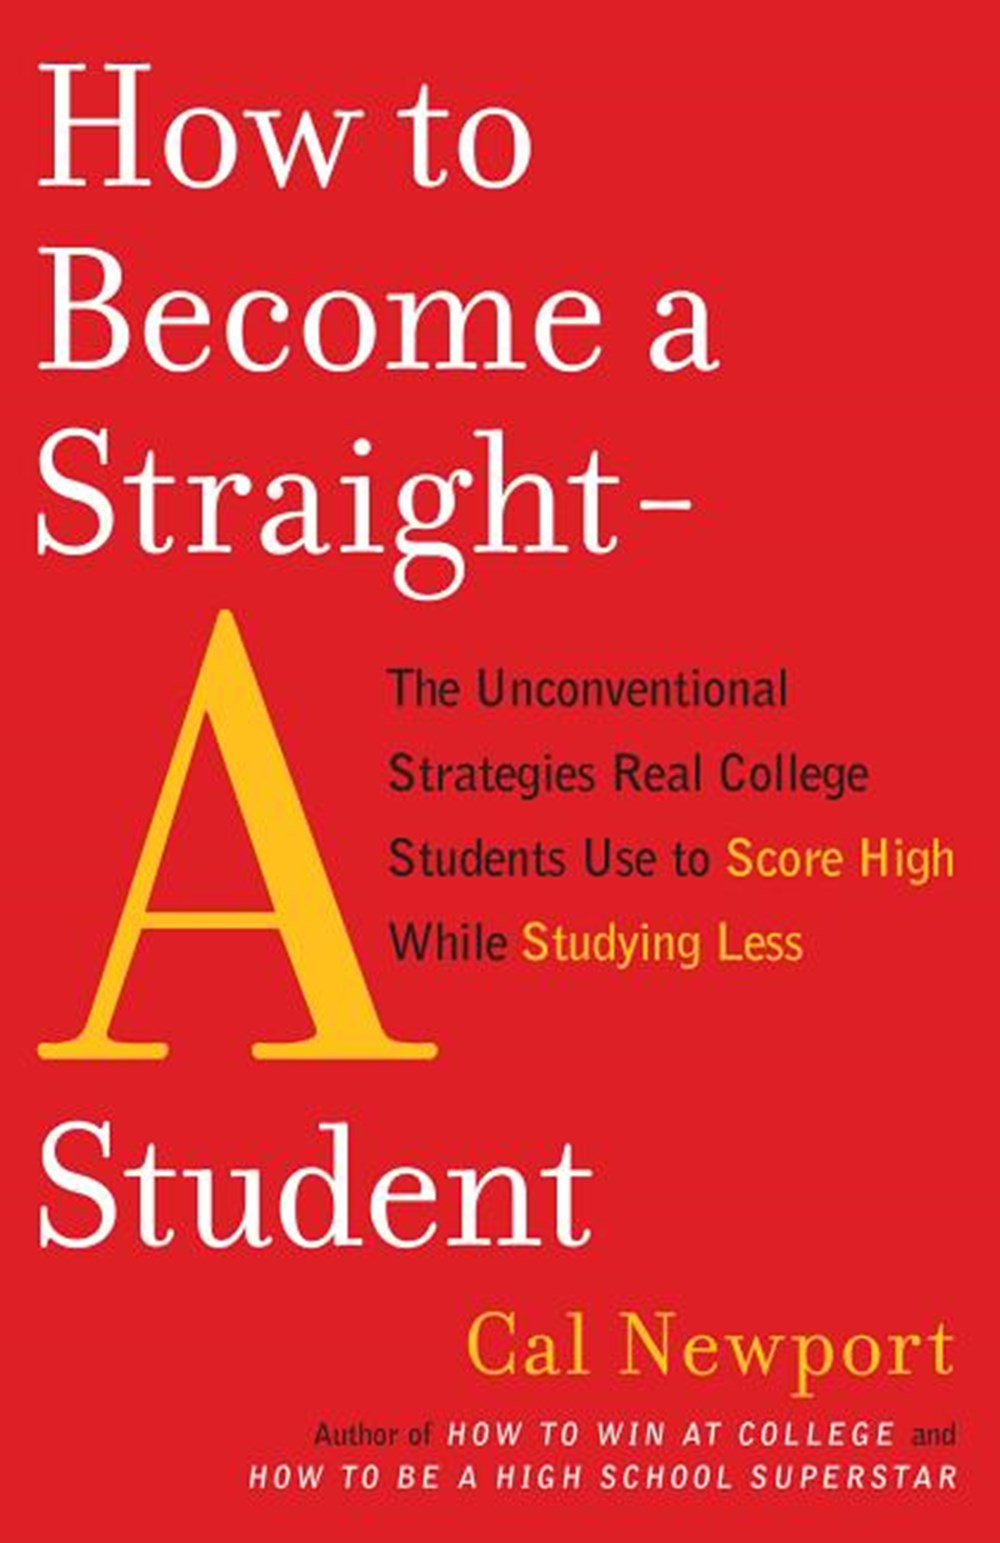 How to Become a Straight-A Student: The Unconventional Strategies Real College Students Use to Score